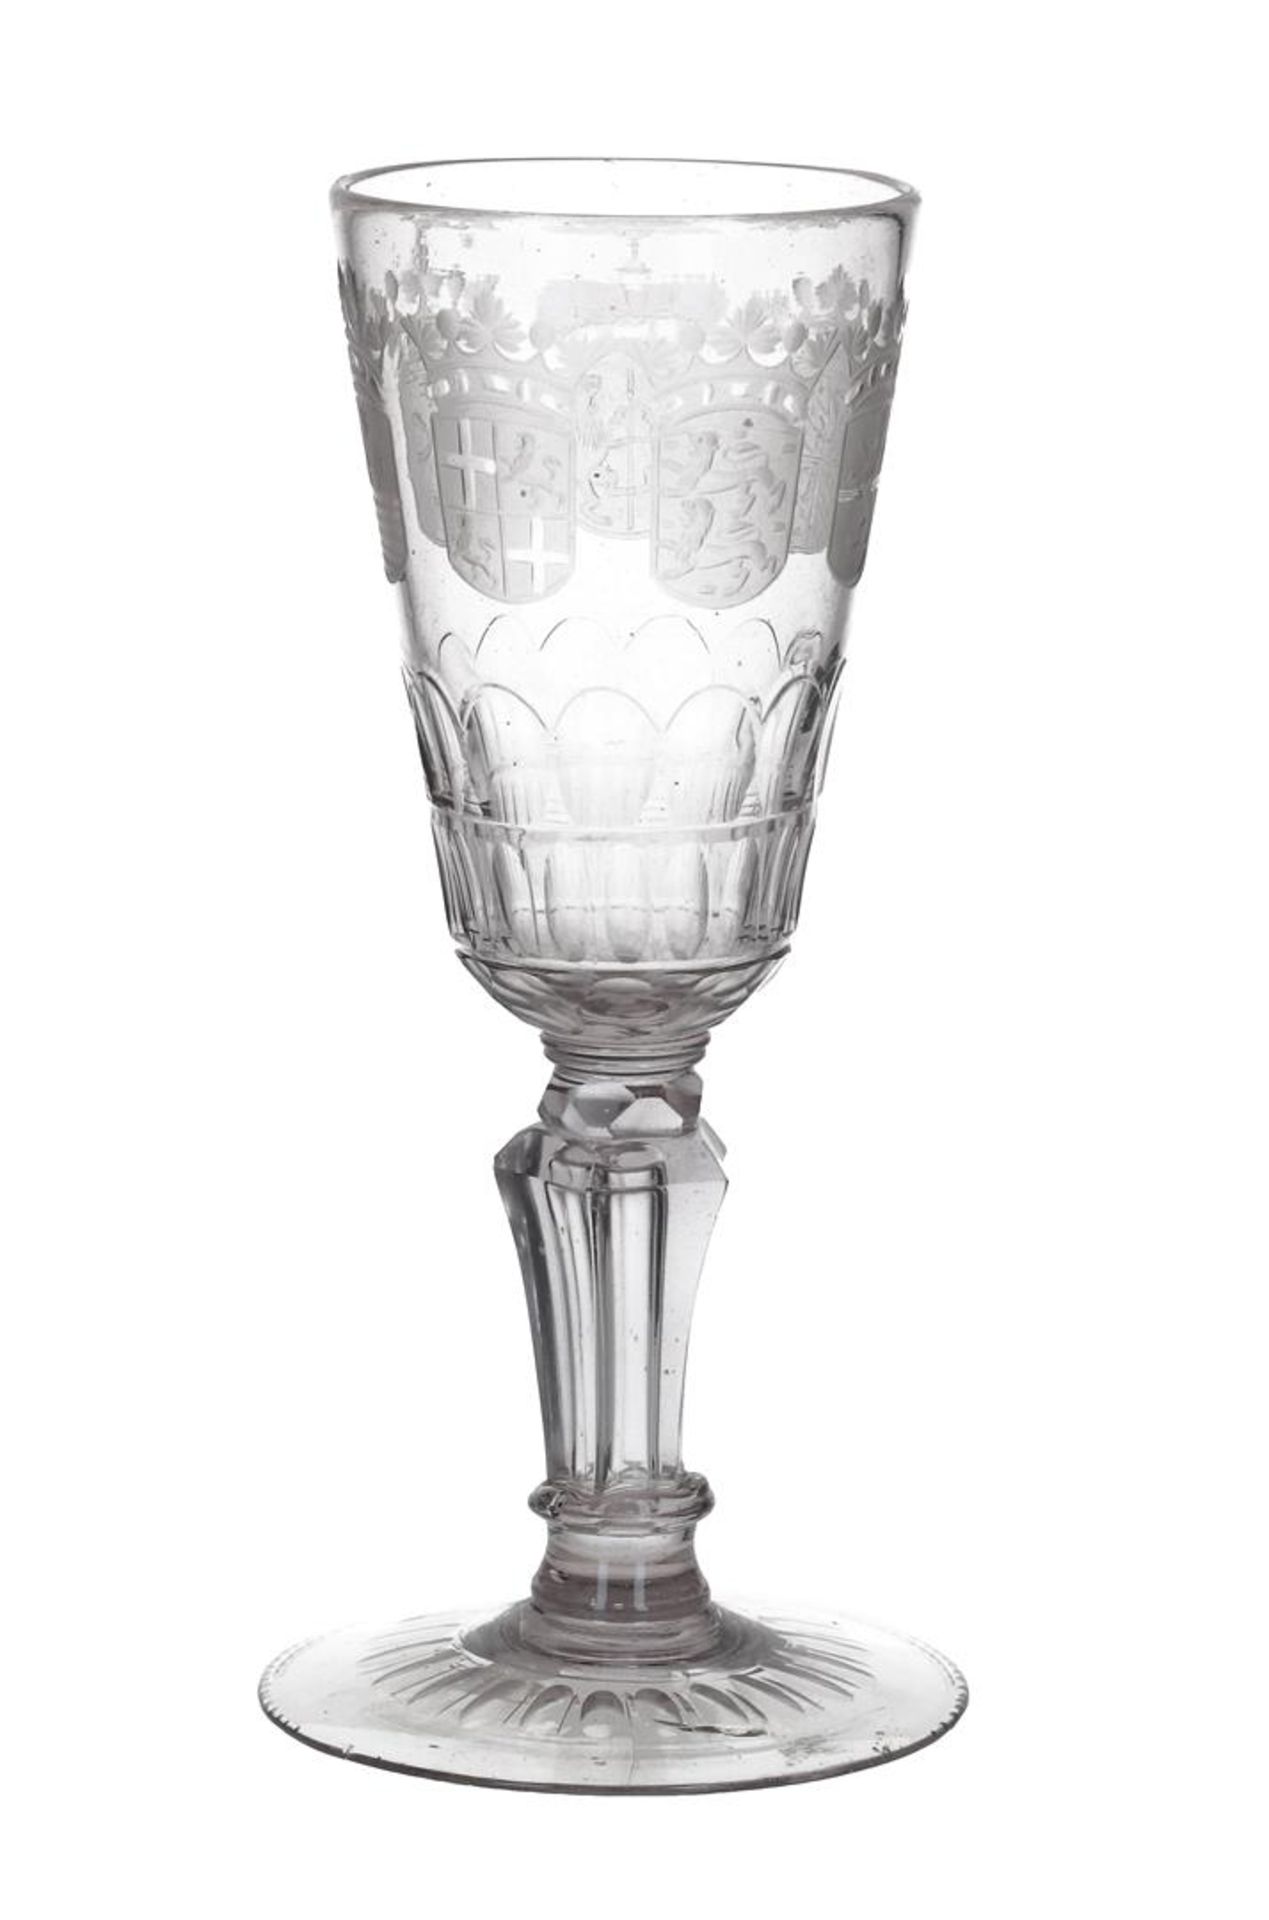 A glass goblet with heraldry of the Seven Provinces. Holland, 18th century.